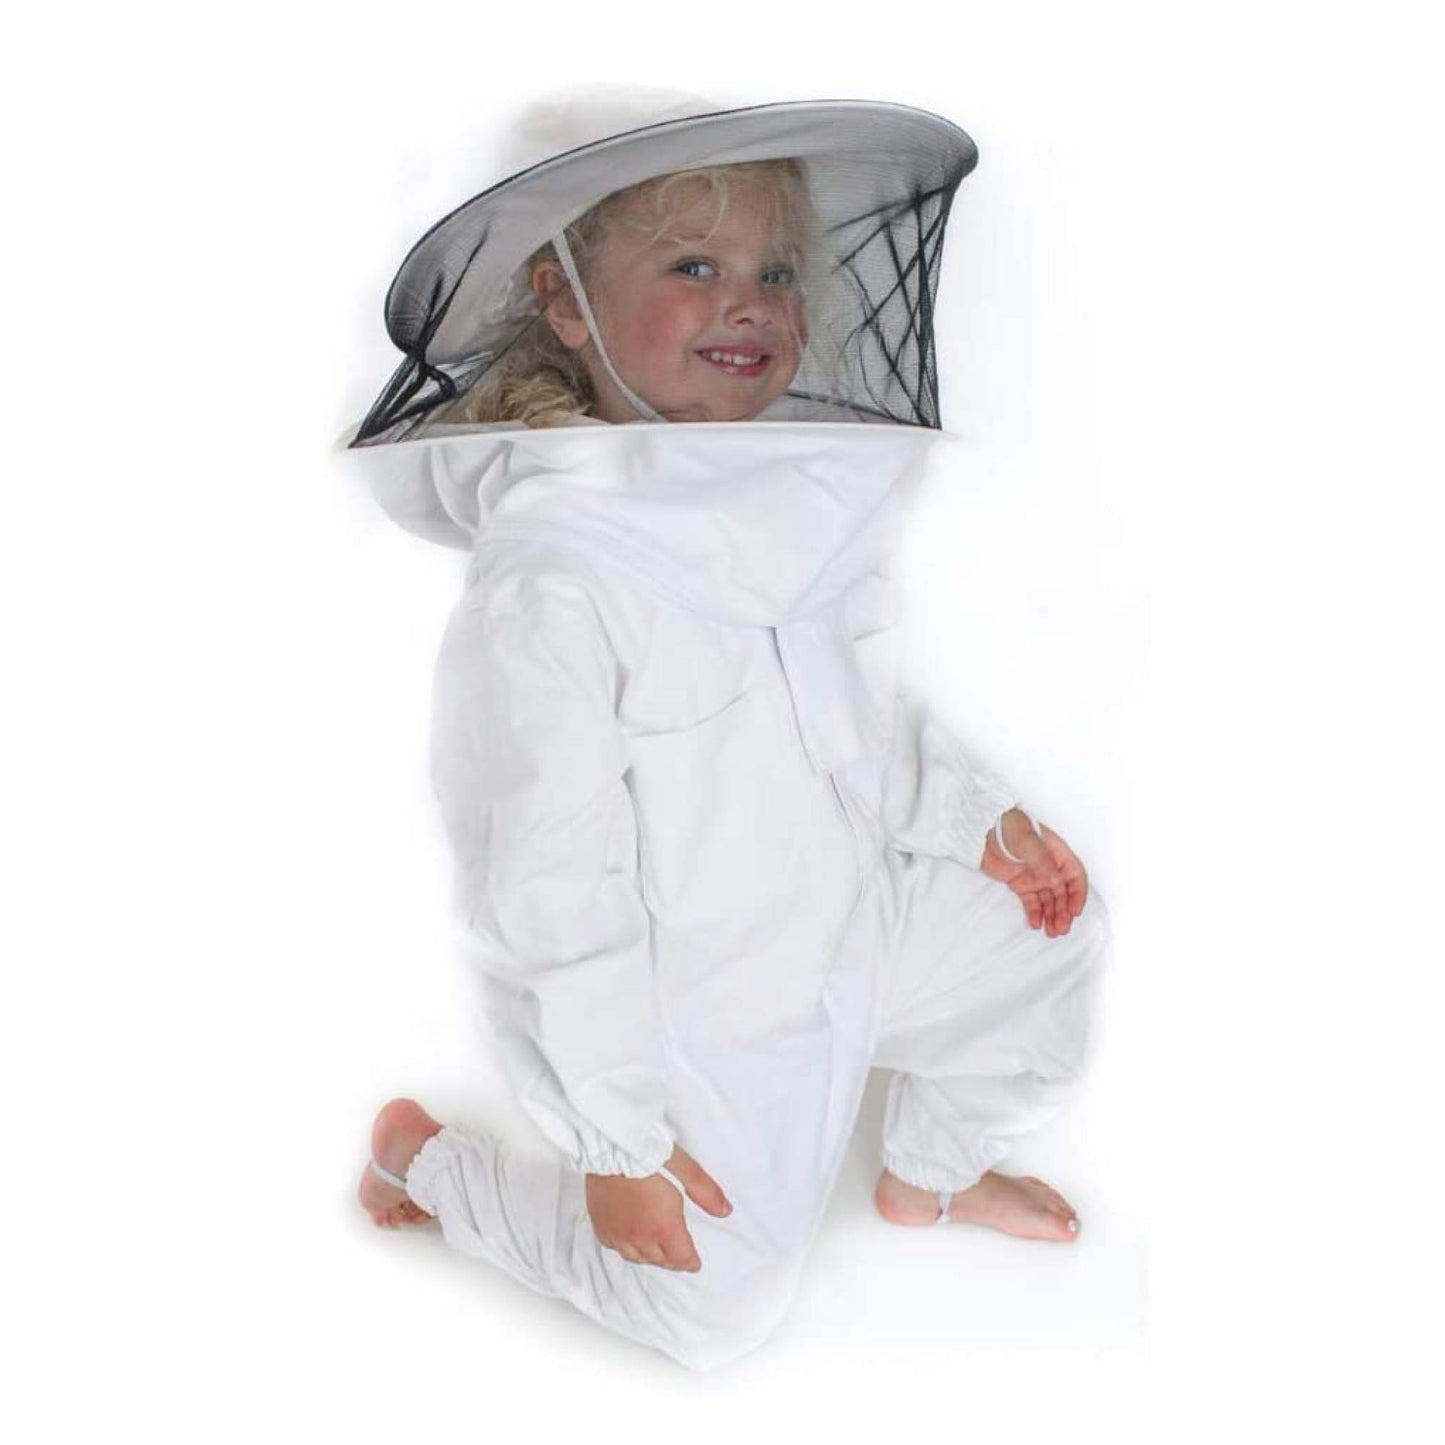 Kids Beekeeping Suit Children's Bee Keeping Outfit Veil Cotton Protective Overall